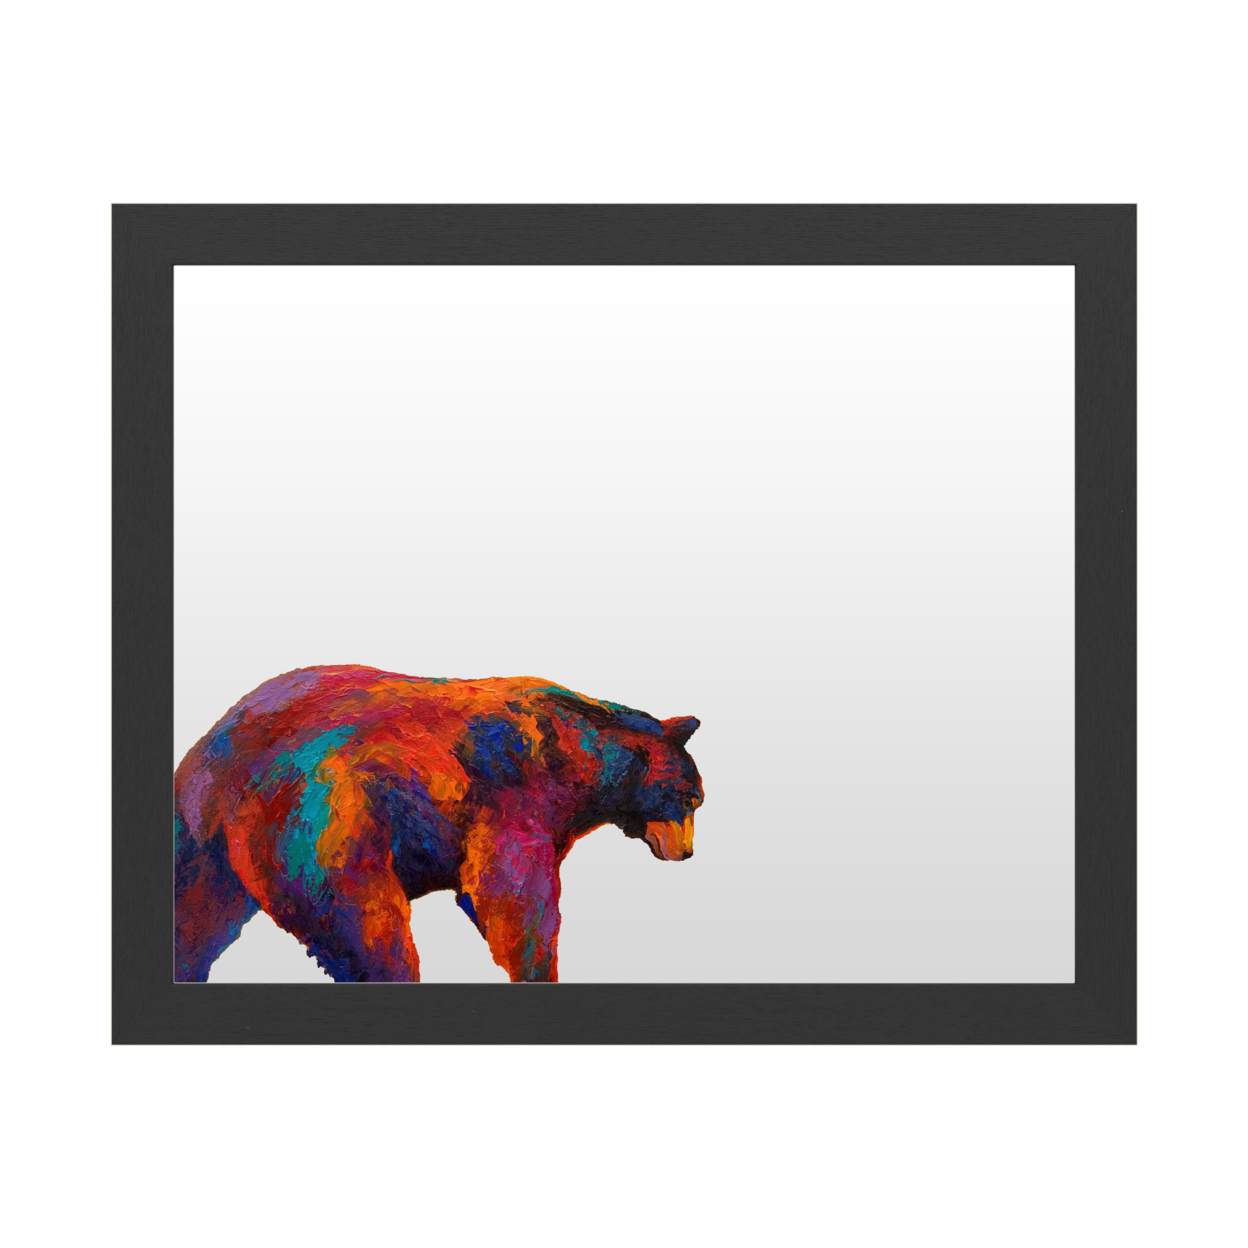 Dry Erase 16 X 20 Marker Board With Printed Artwork - Marion Rose Daily Rounds Black Bear White Board - Ready To Hang